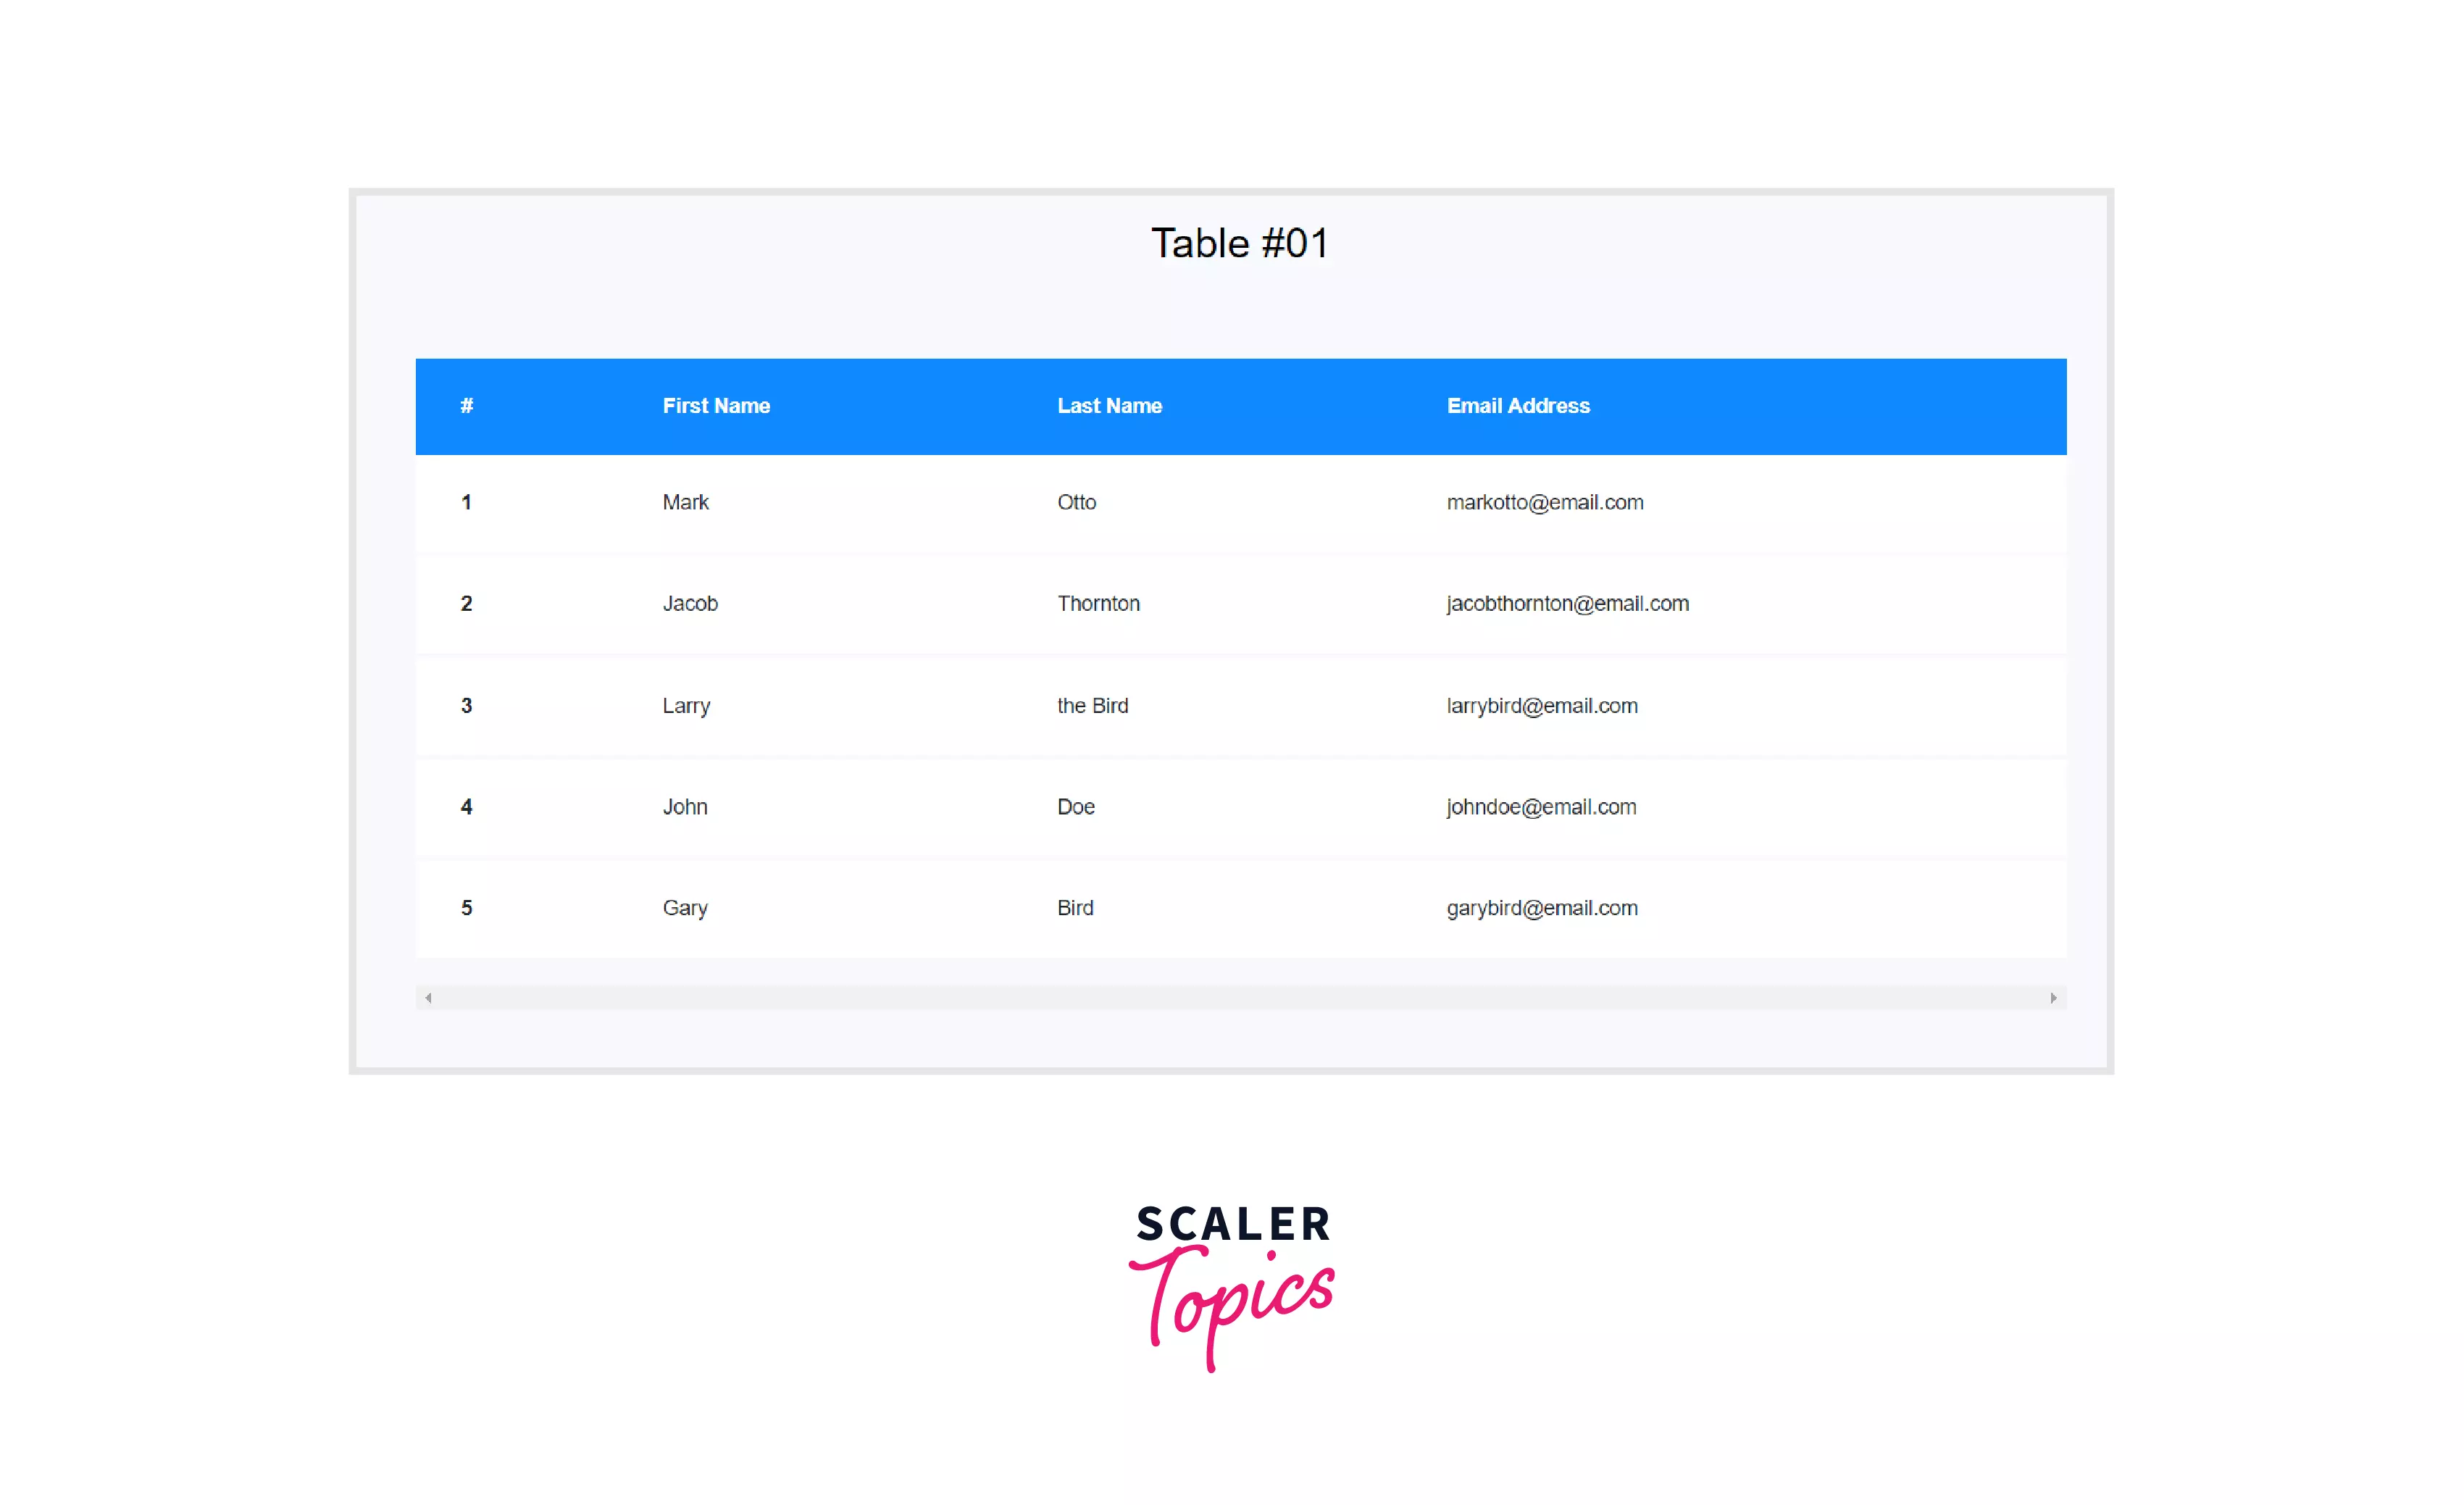 sample use cases for tables